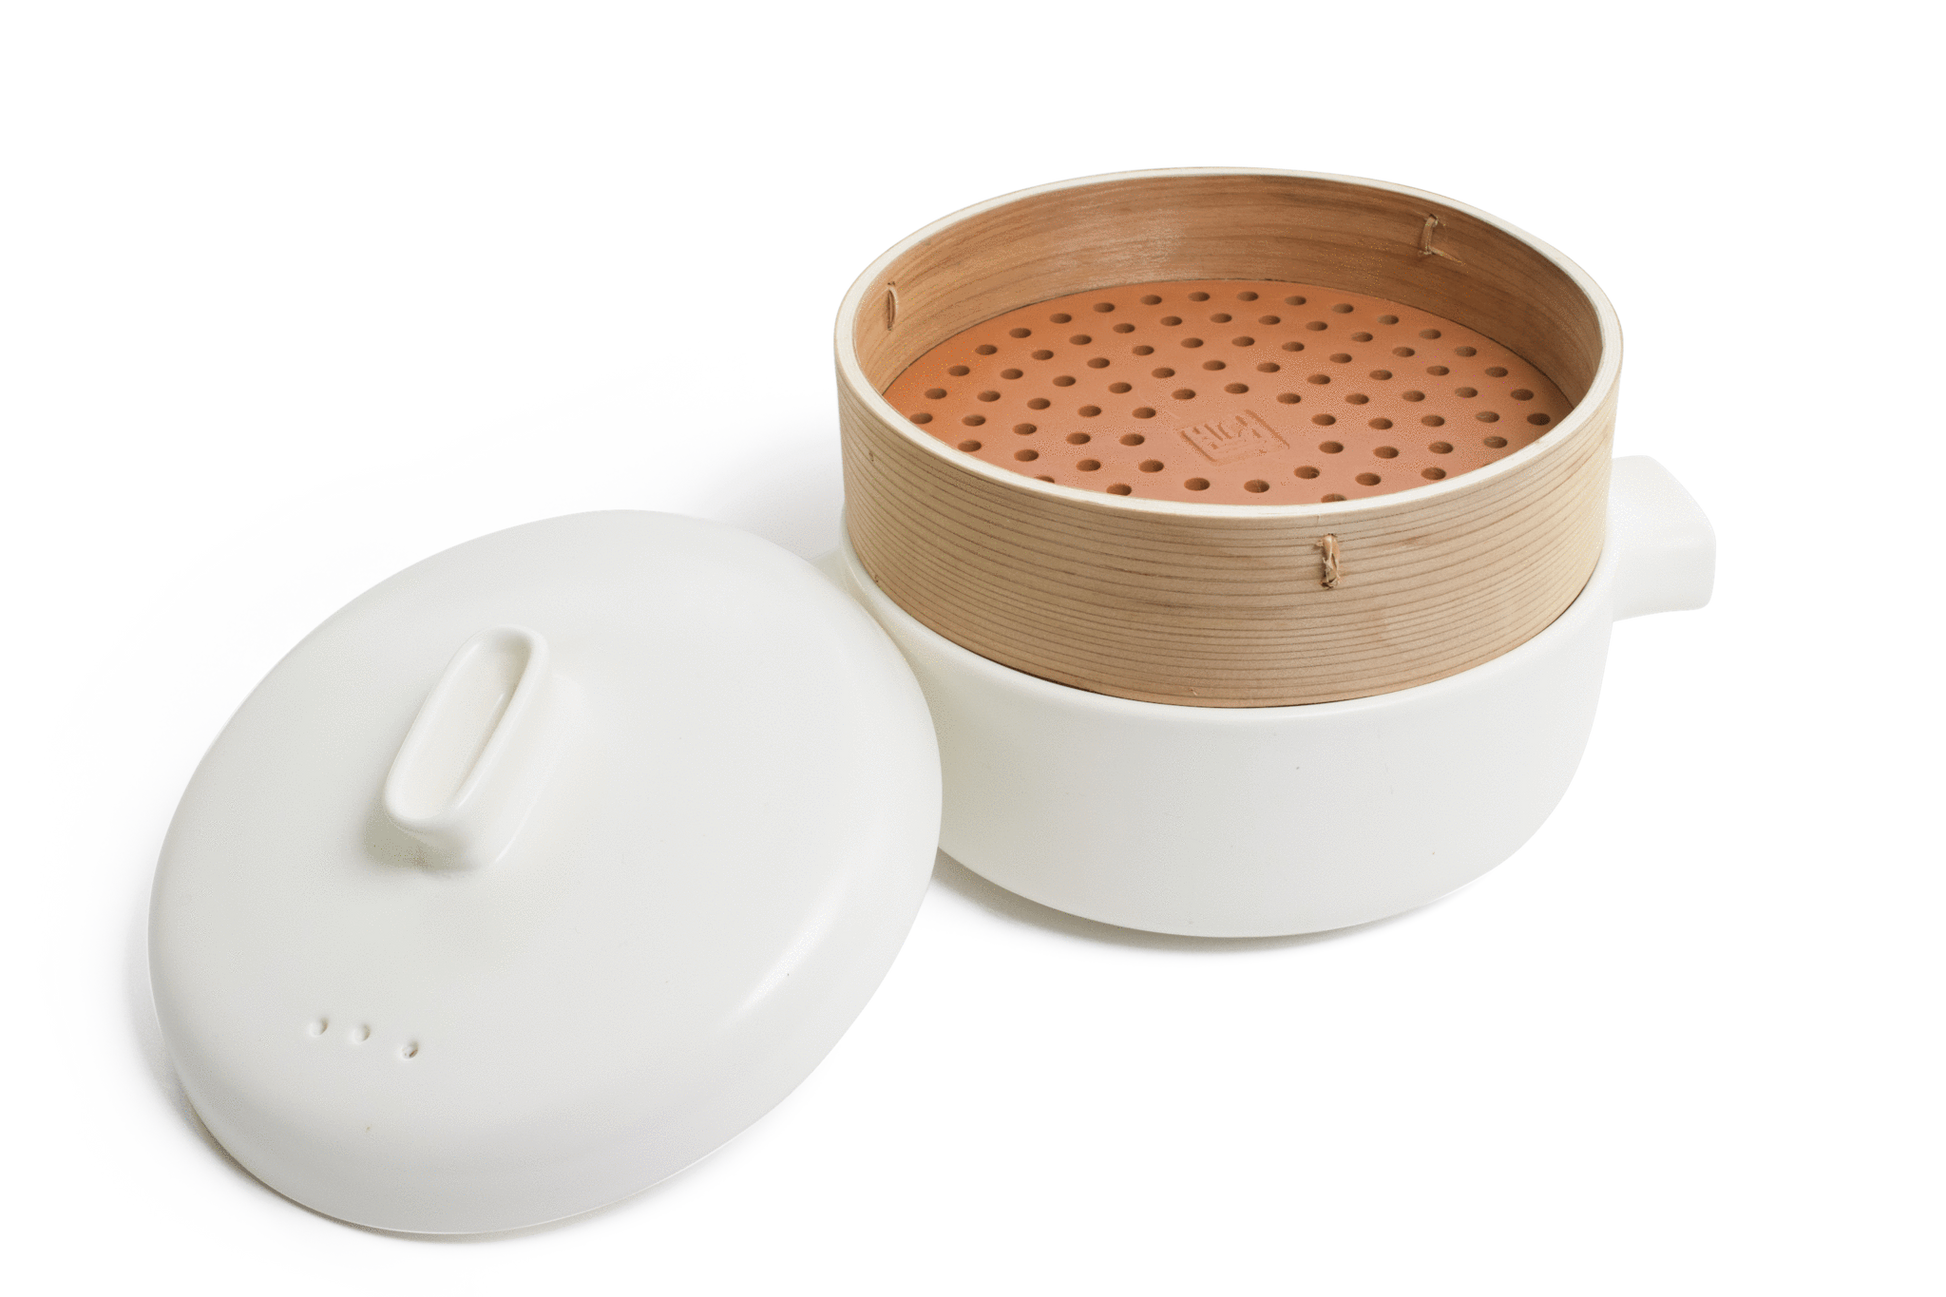 Jia Inc Food Steamer and Rice Cooker Combo Set